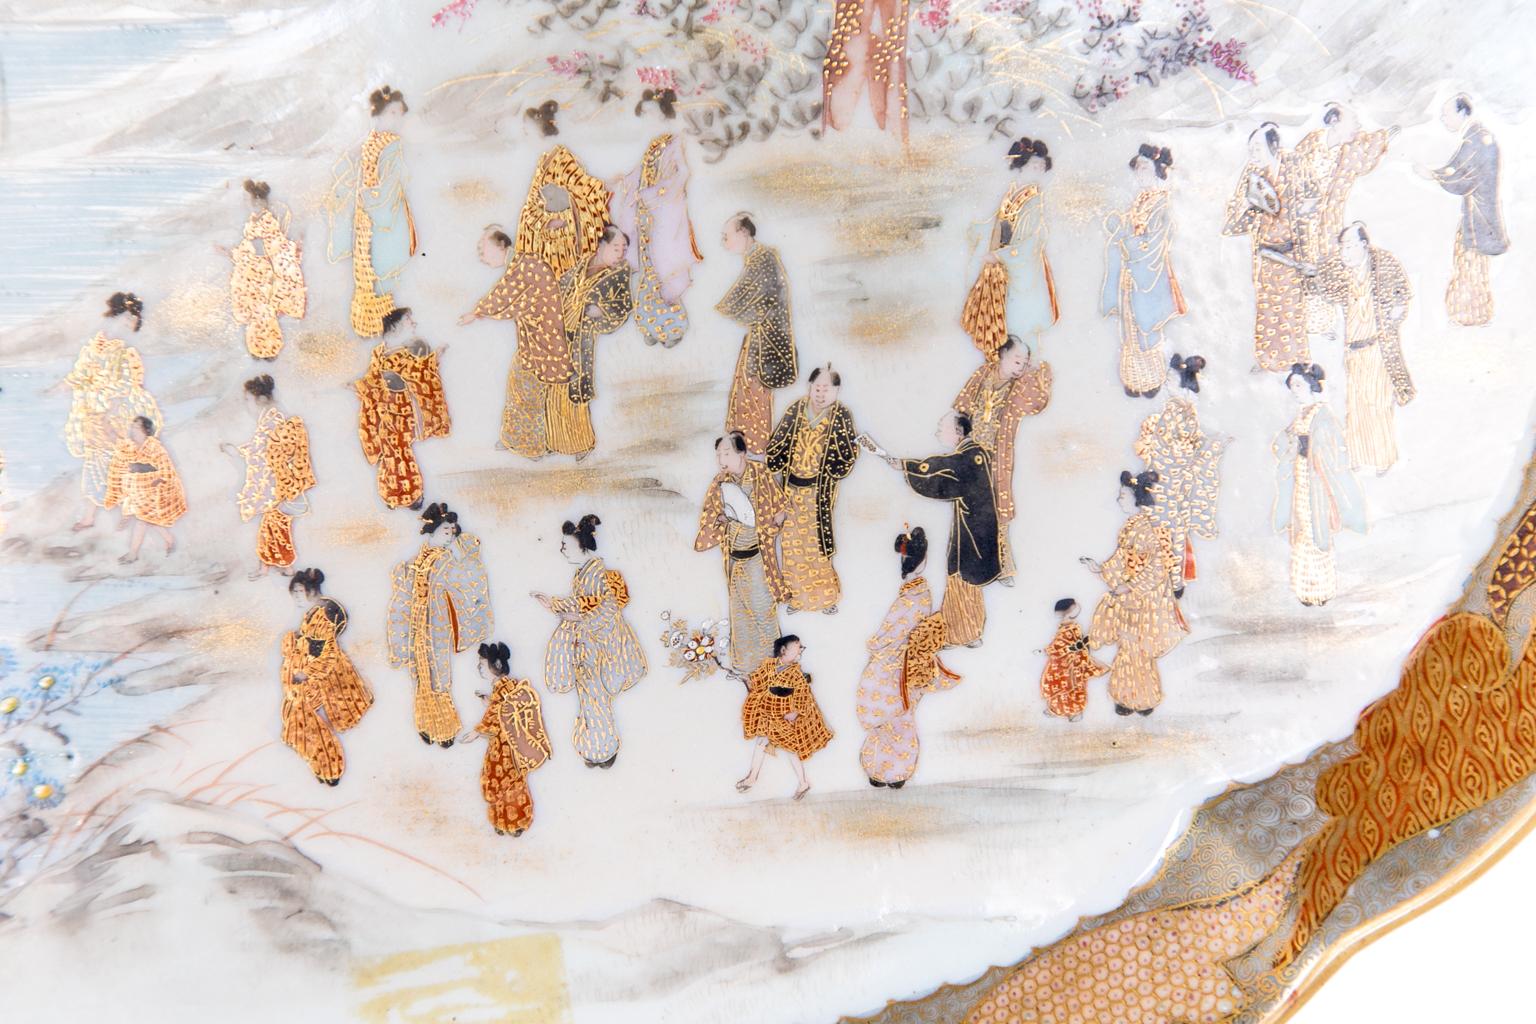 Satsuma porcelain tray, depicting multiple court figures surrounding and wading in a lake. The figures are adorned with abundant and finely detailed gold with landscape in the background. The angled gallery is decorated with intricately painted gold